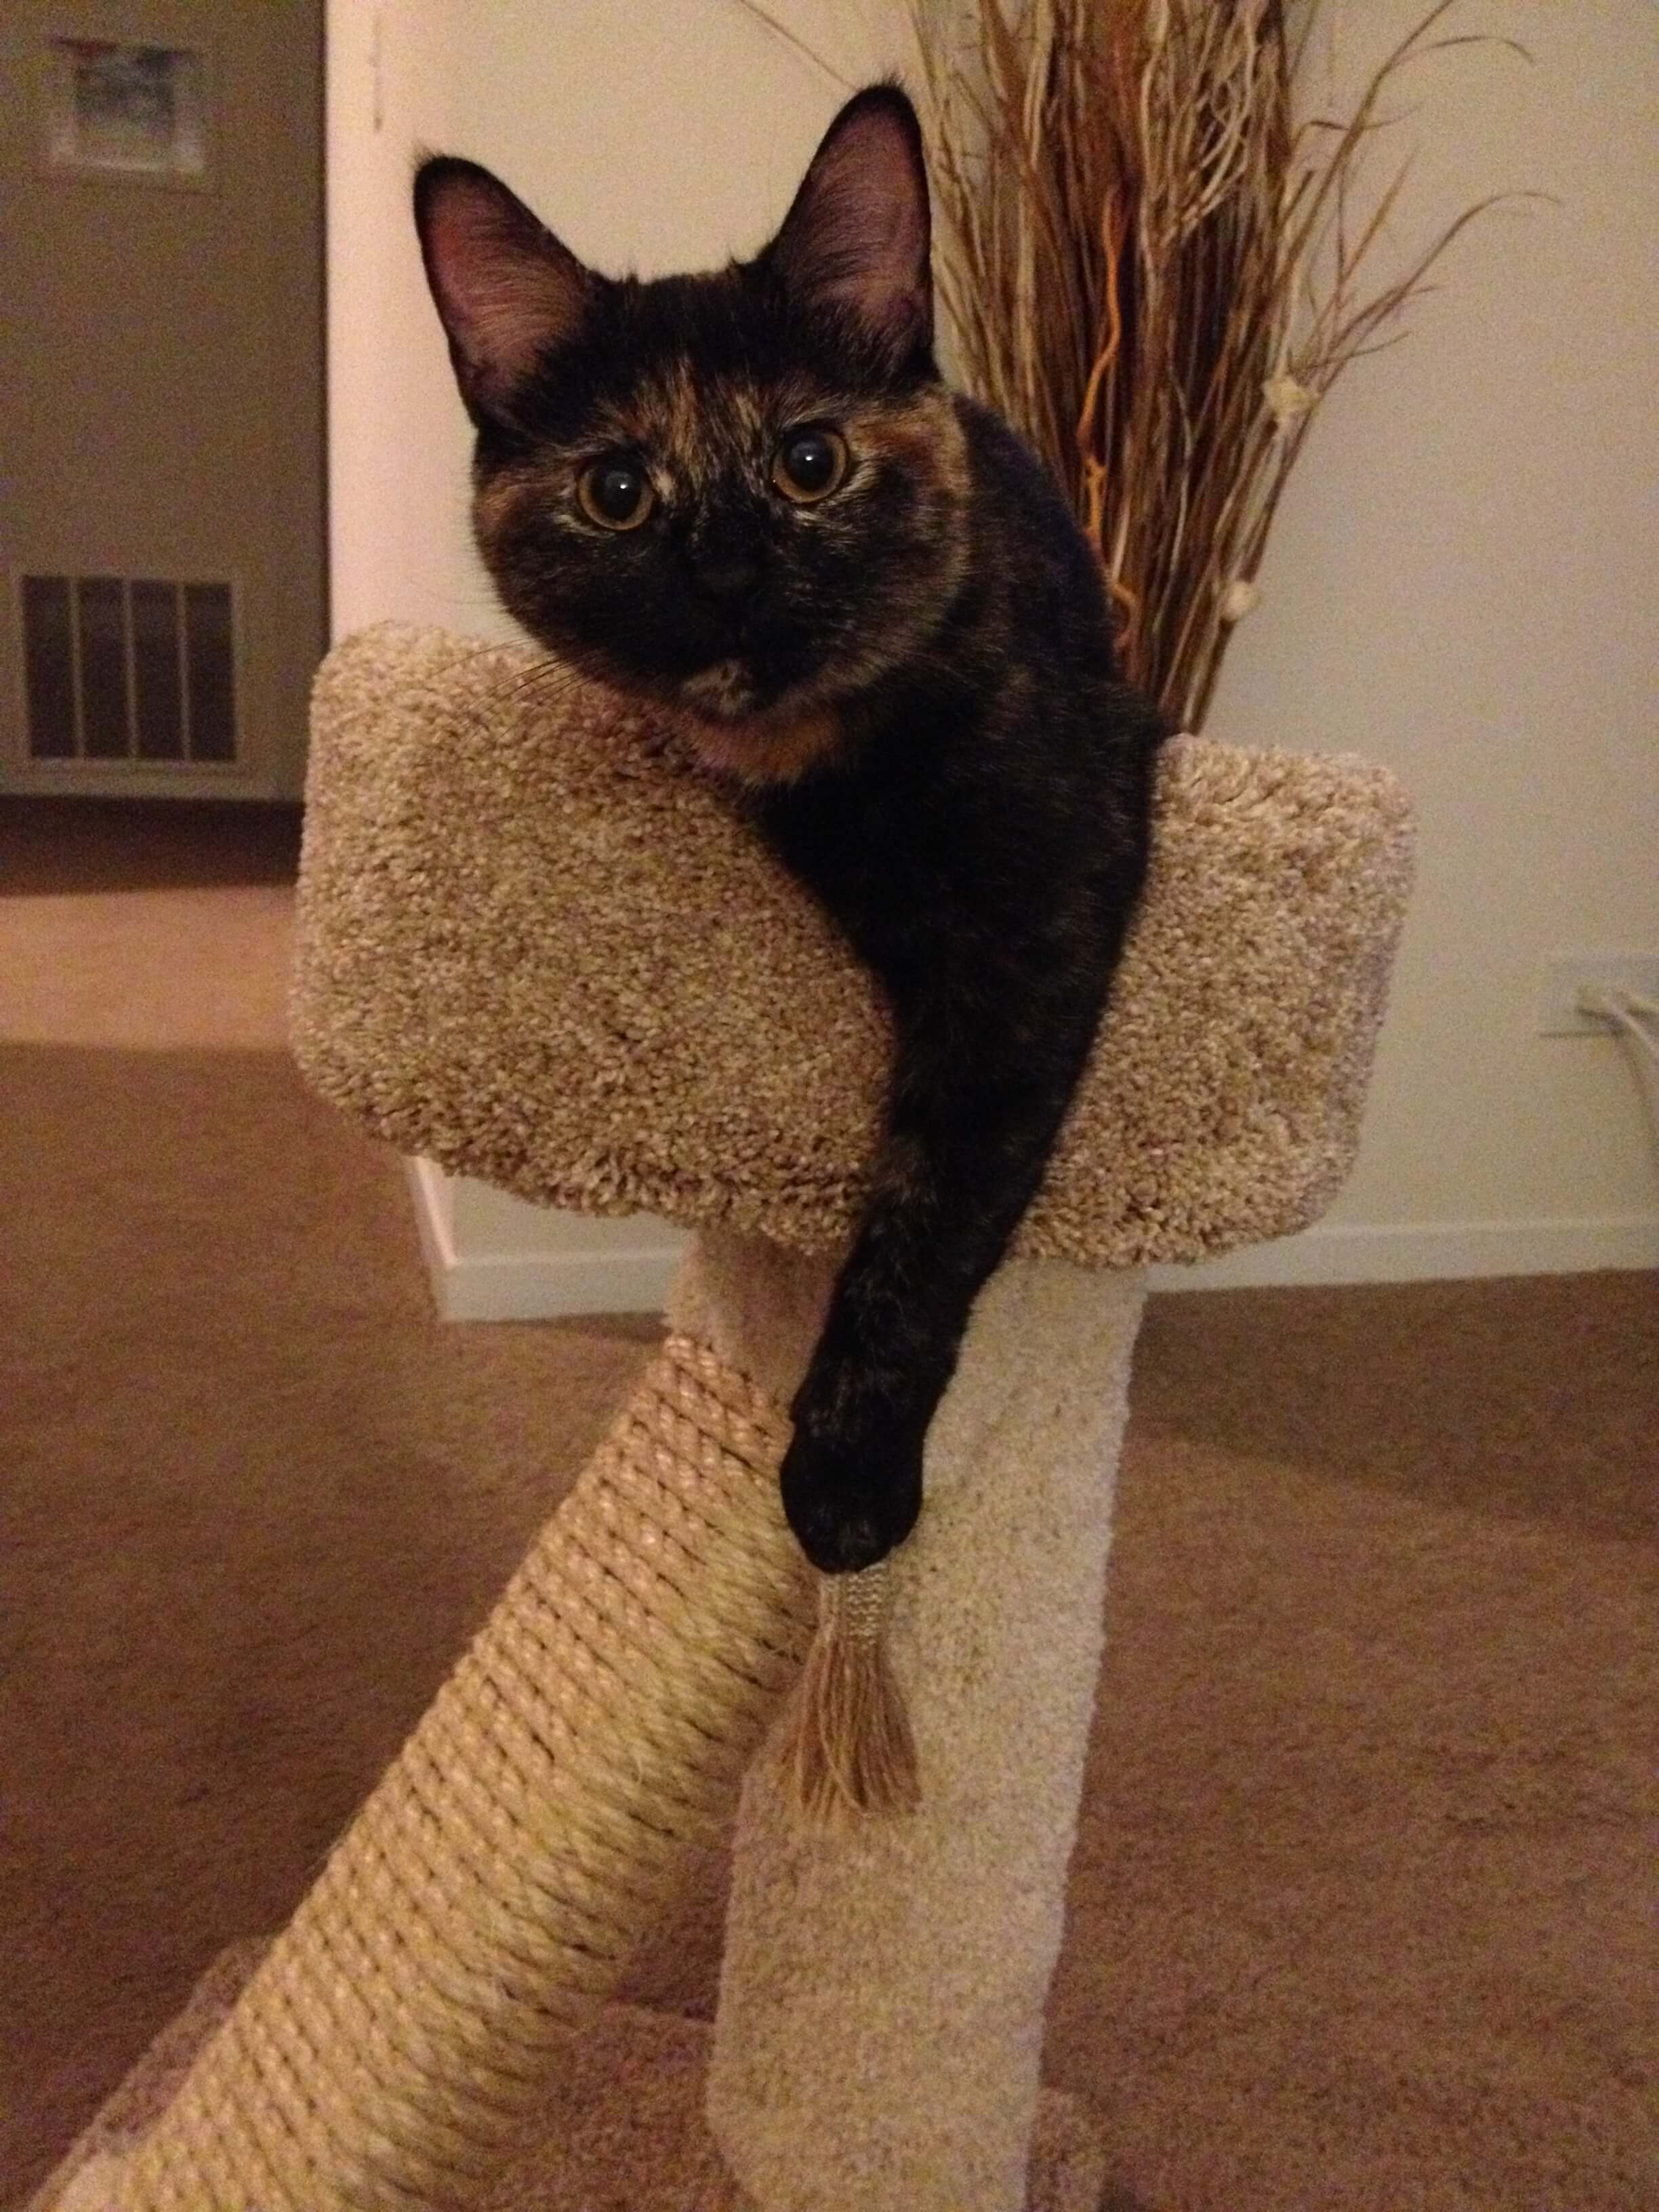 Catalina in her tower